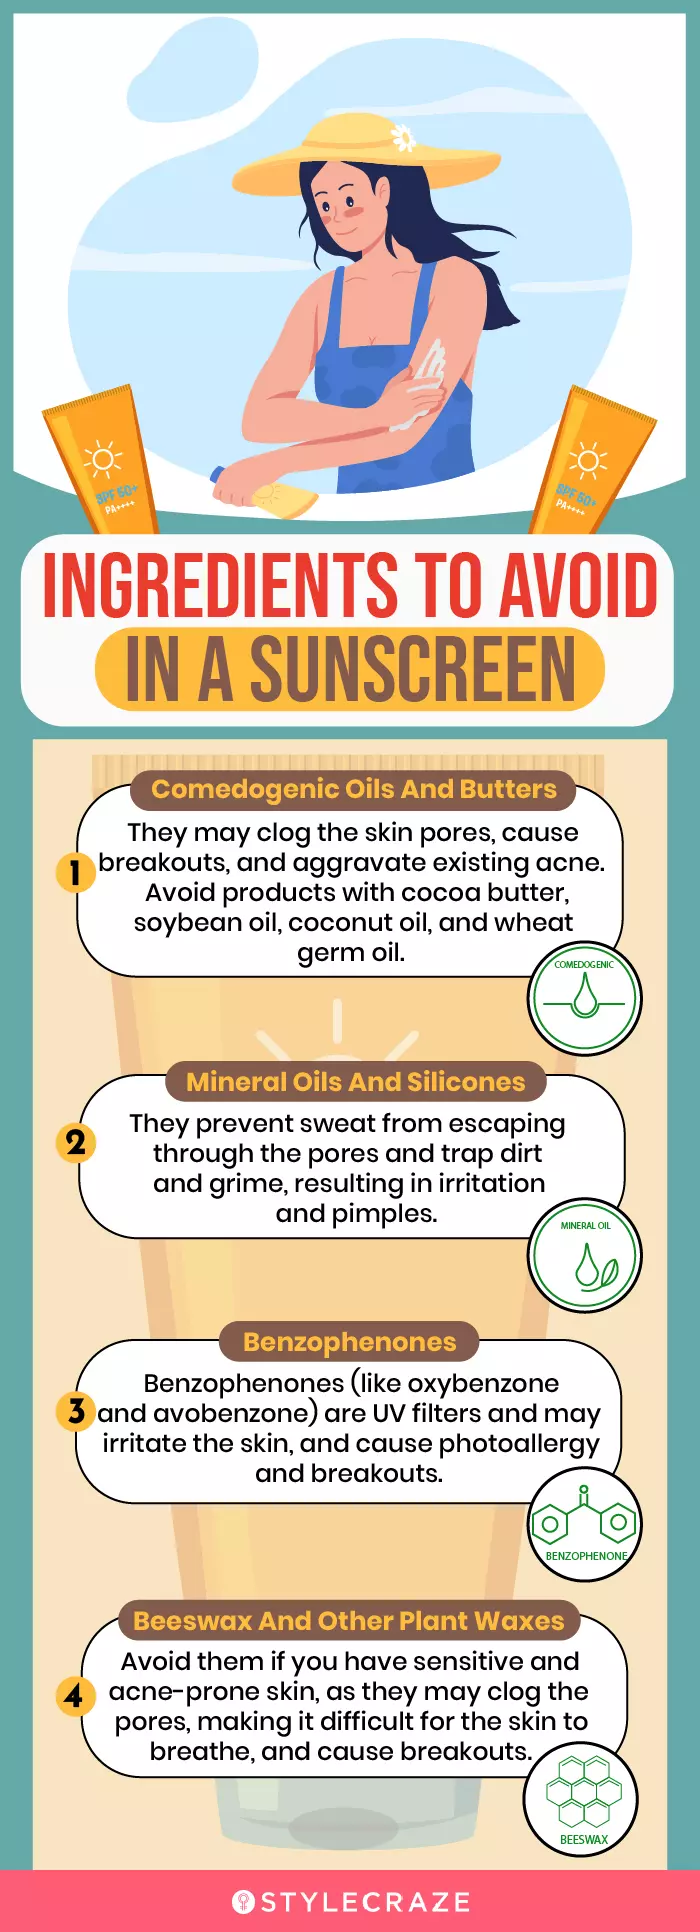 ingredients to avoid in a sunscreen (infographic)